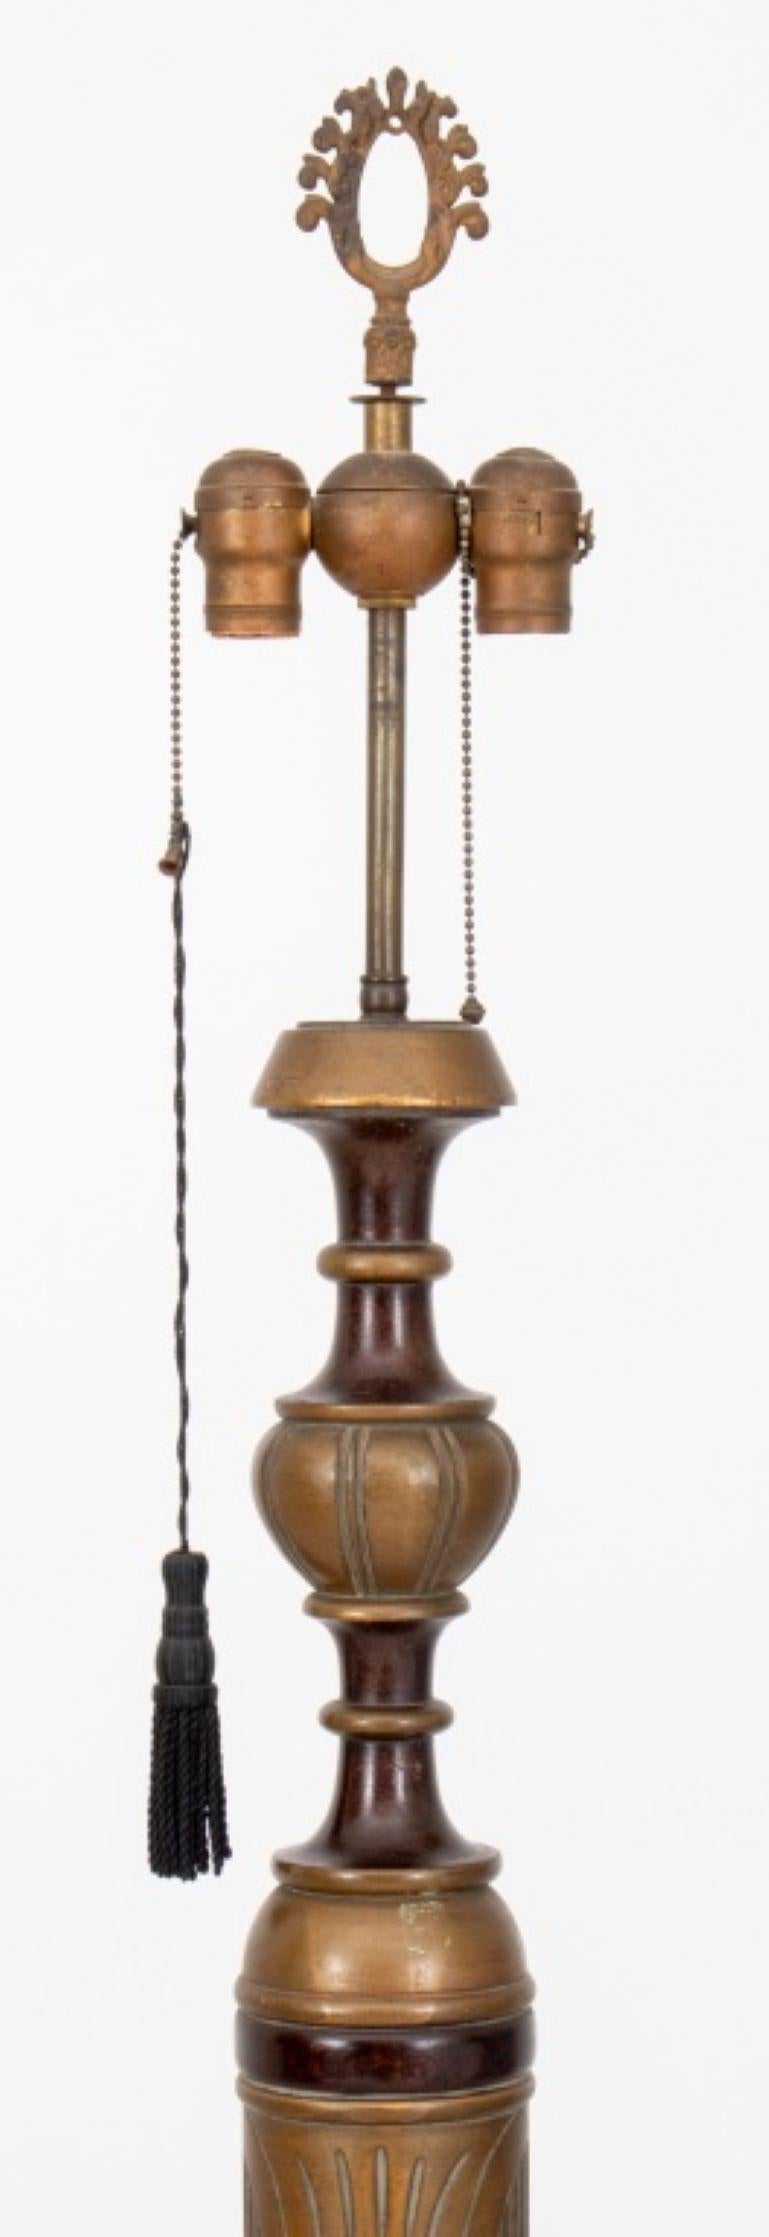 Eclectic Gilded Age floor lamp, circa 1910, with turned and carved ornamentation, parcel gilded and faux bois decorated on molded circular base.